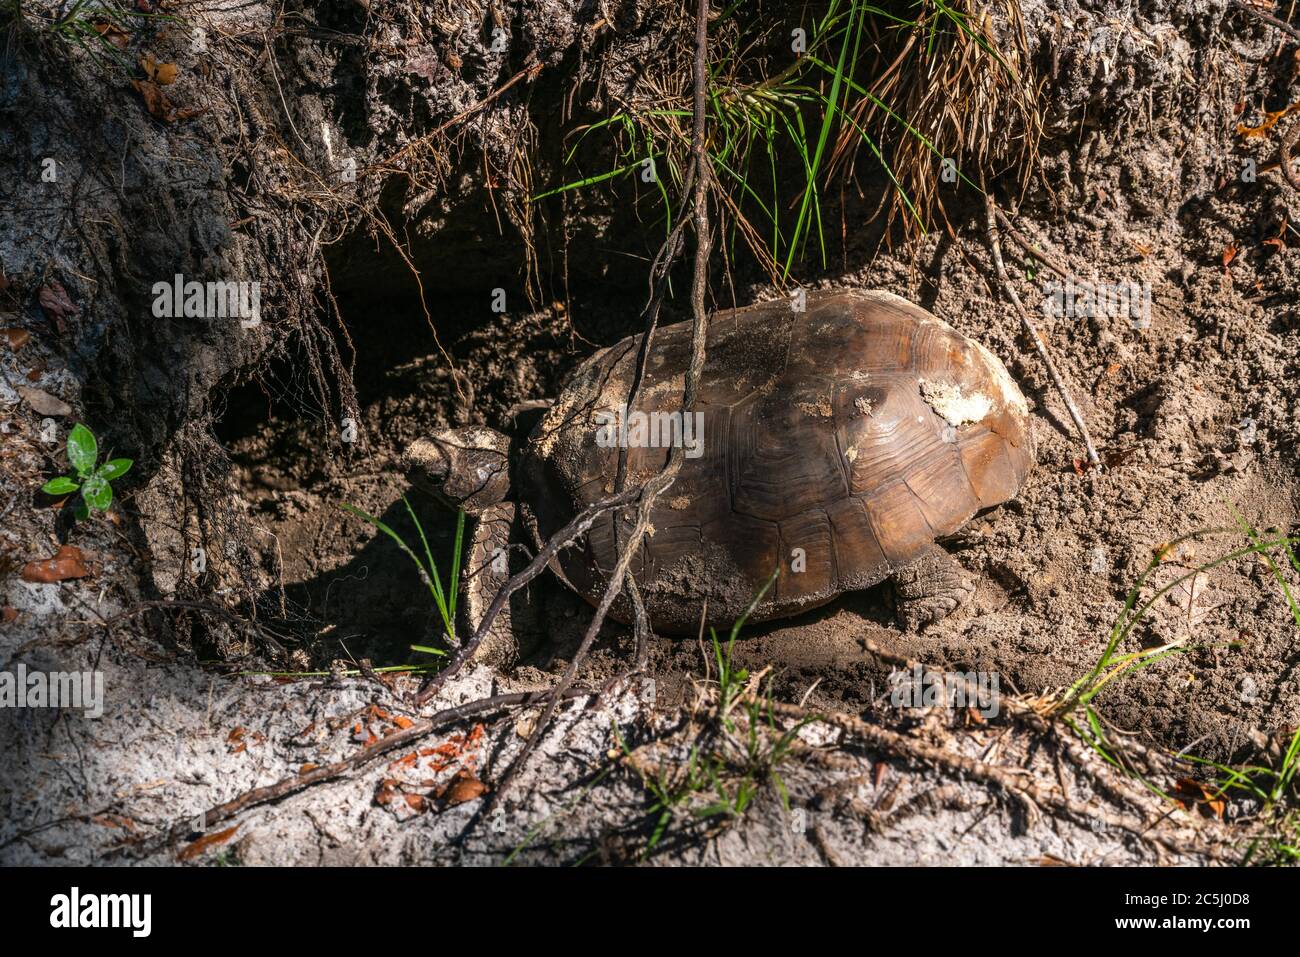 A turtle or tortoise digging in the ground to lay its eggs Stock Photo